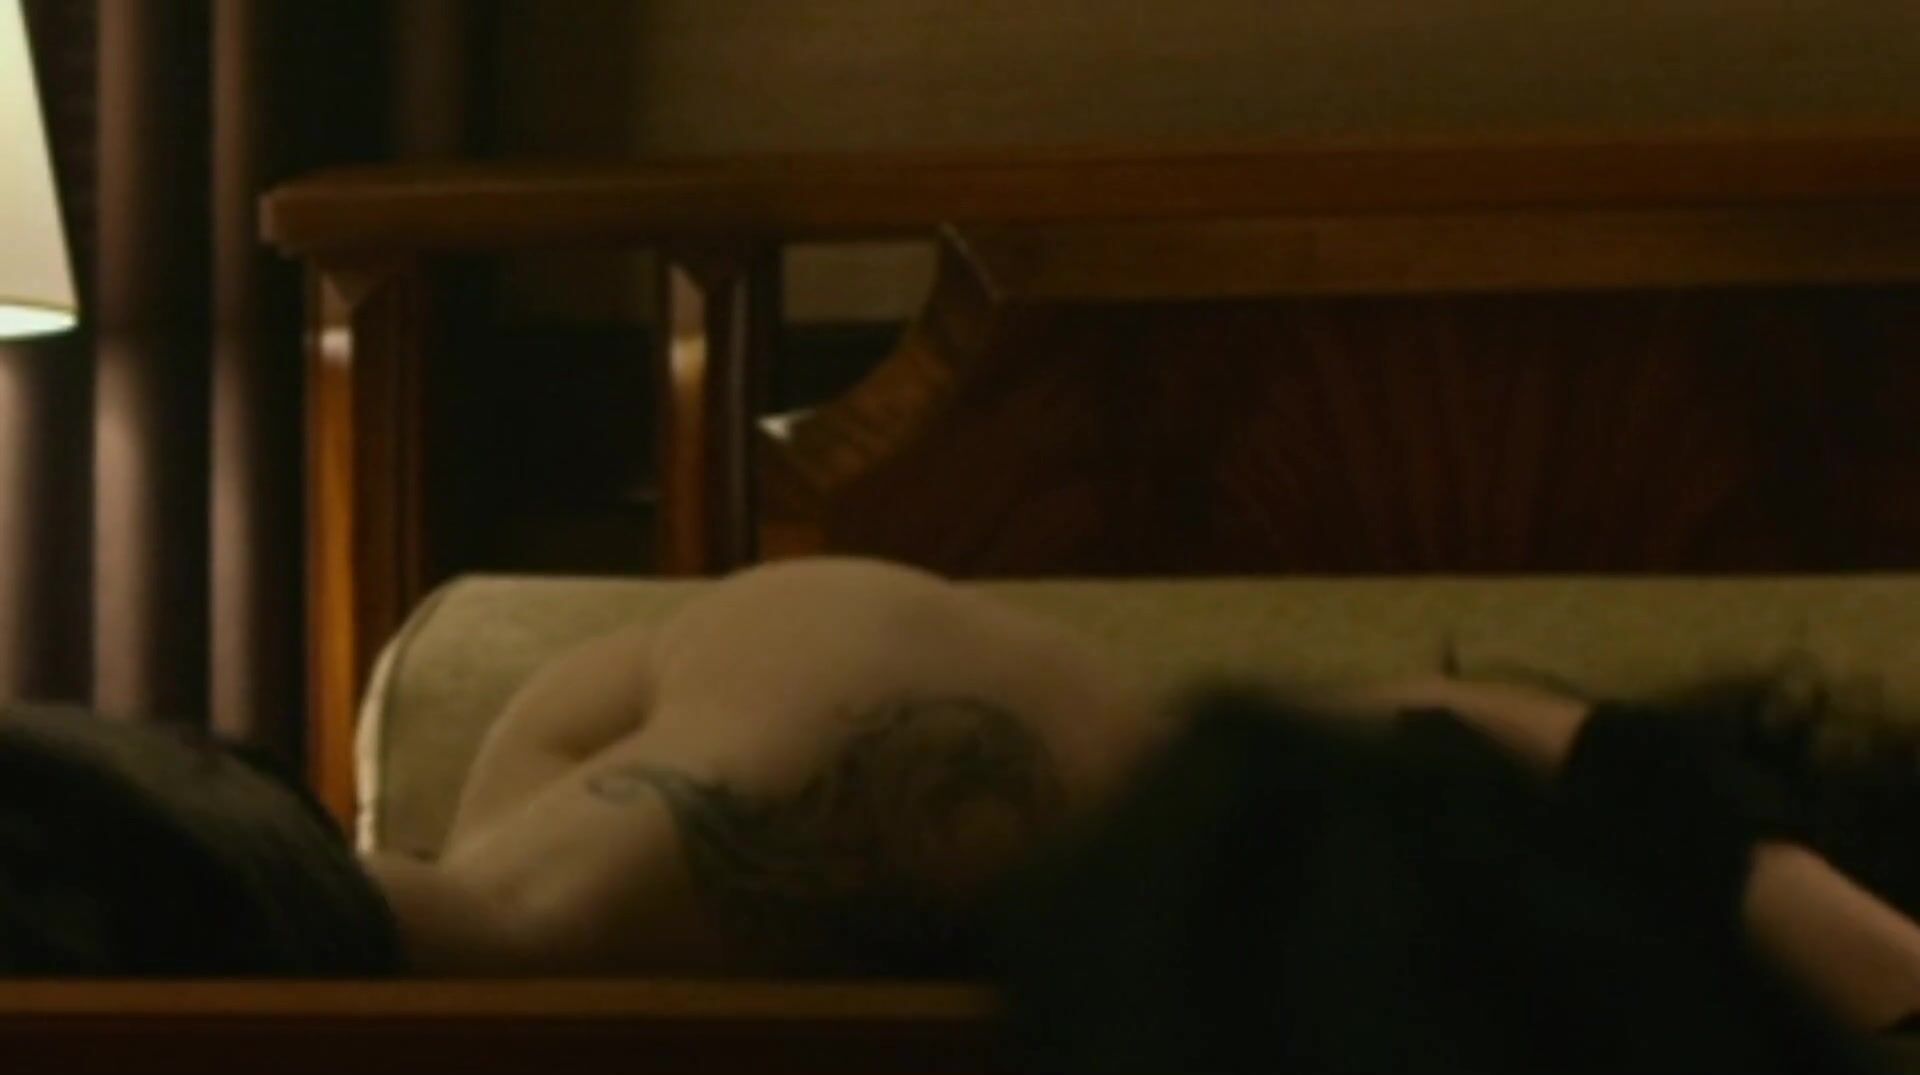 SoloPornoItaliani Men hump Rooney Mara with her consent or without it in Girl With The Dragon Tattoo Blondes - 1